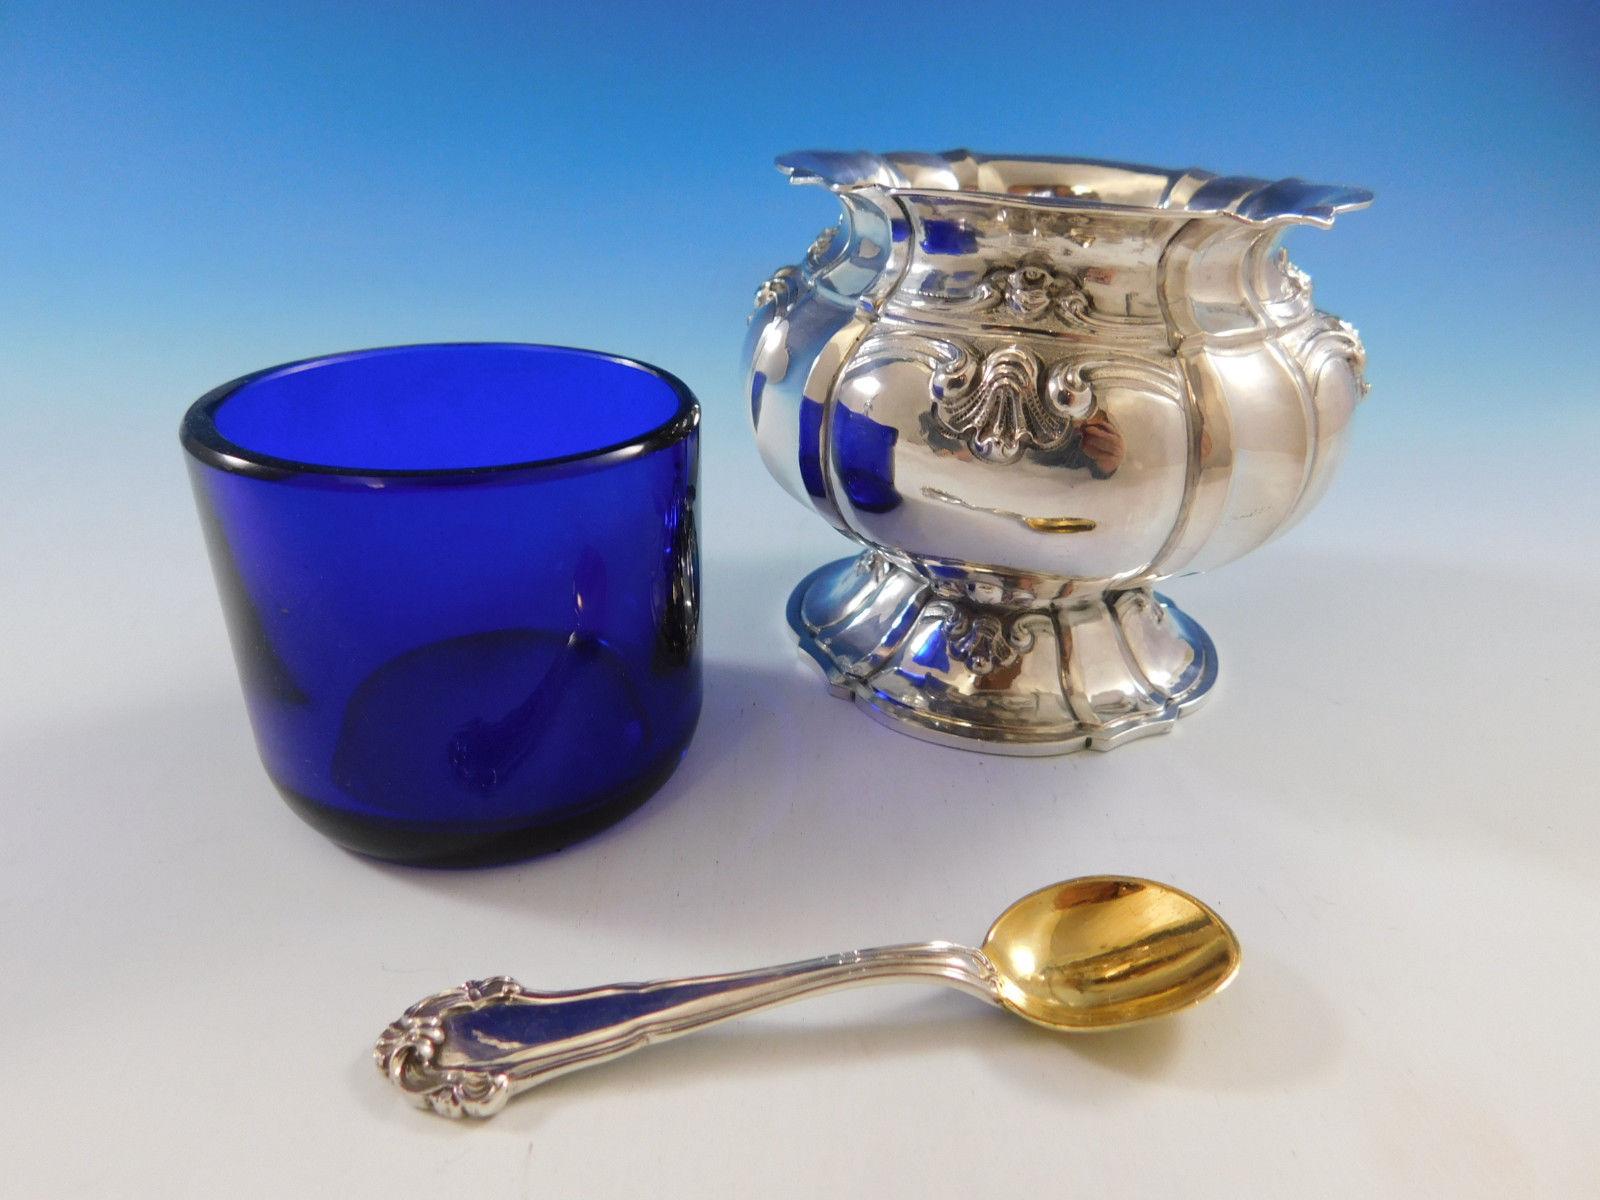 Grande Imperiale by Buccellati sterling silver salt and pepper set
Italy, circa 1970s 

Impressive Grande Imperiale by Buccellati Italy superb sterling silver salt and pepper set includes: 1 large salt cellar with 1 master salt spoon, 1 cobalt blue